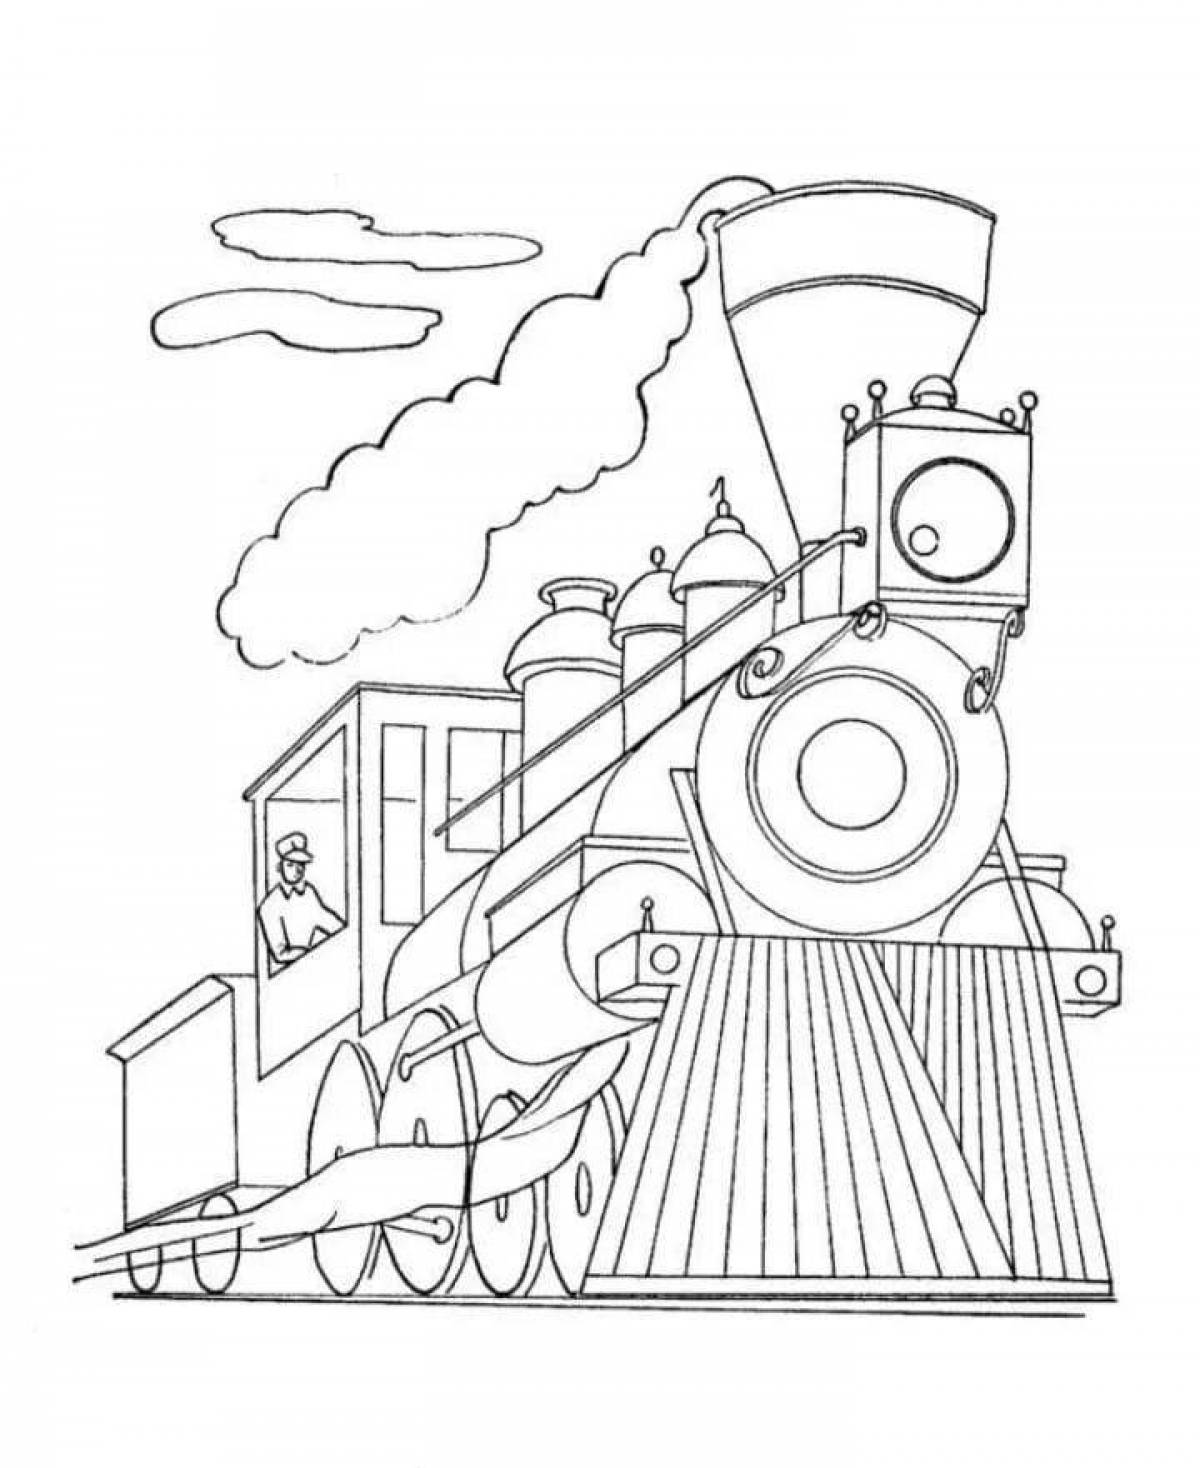 Gorgeous military train coloring book